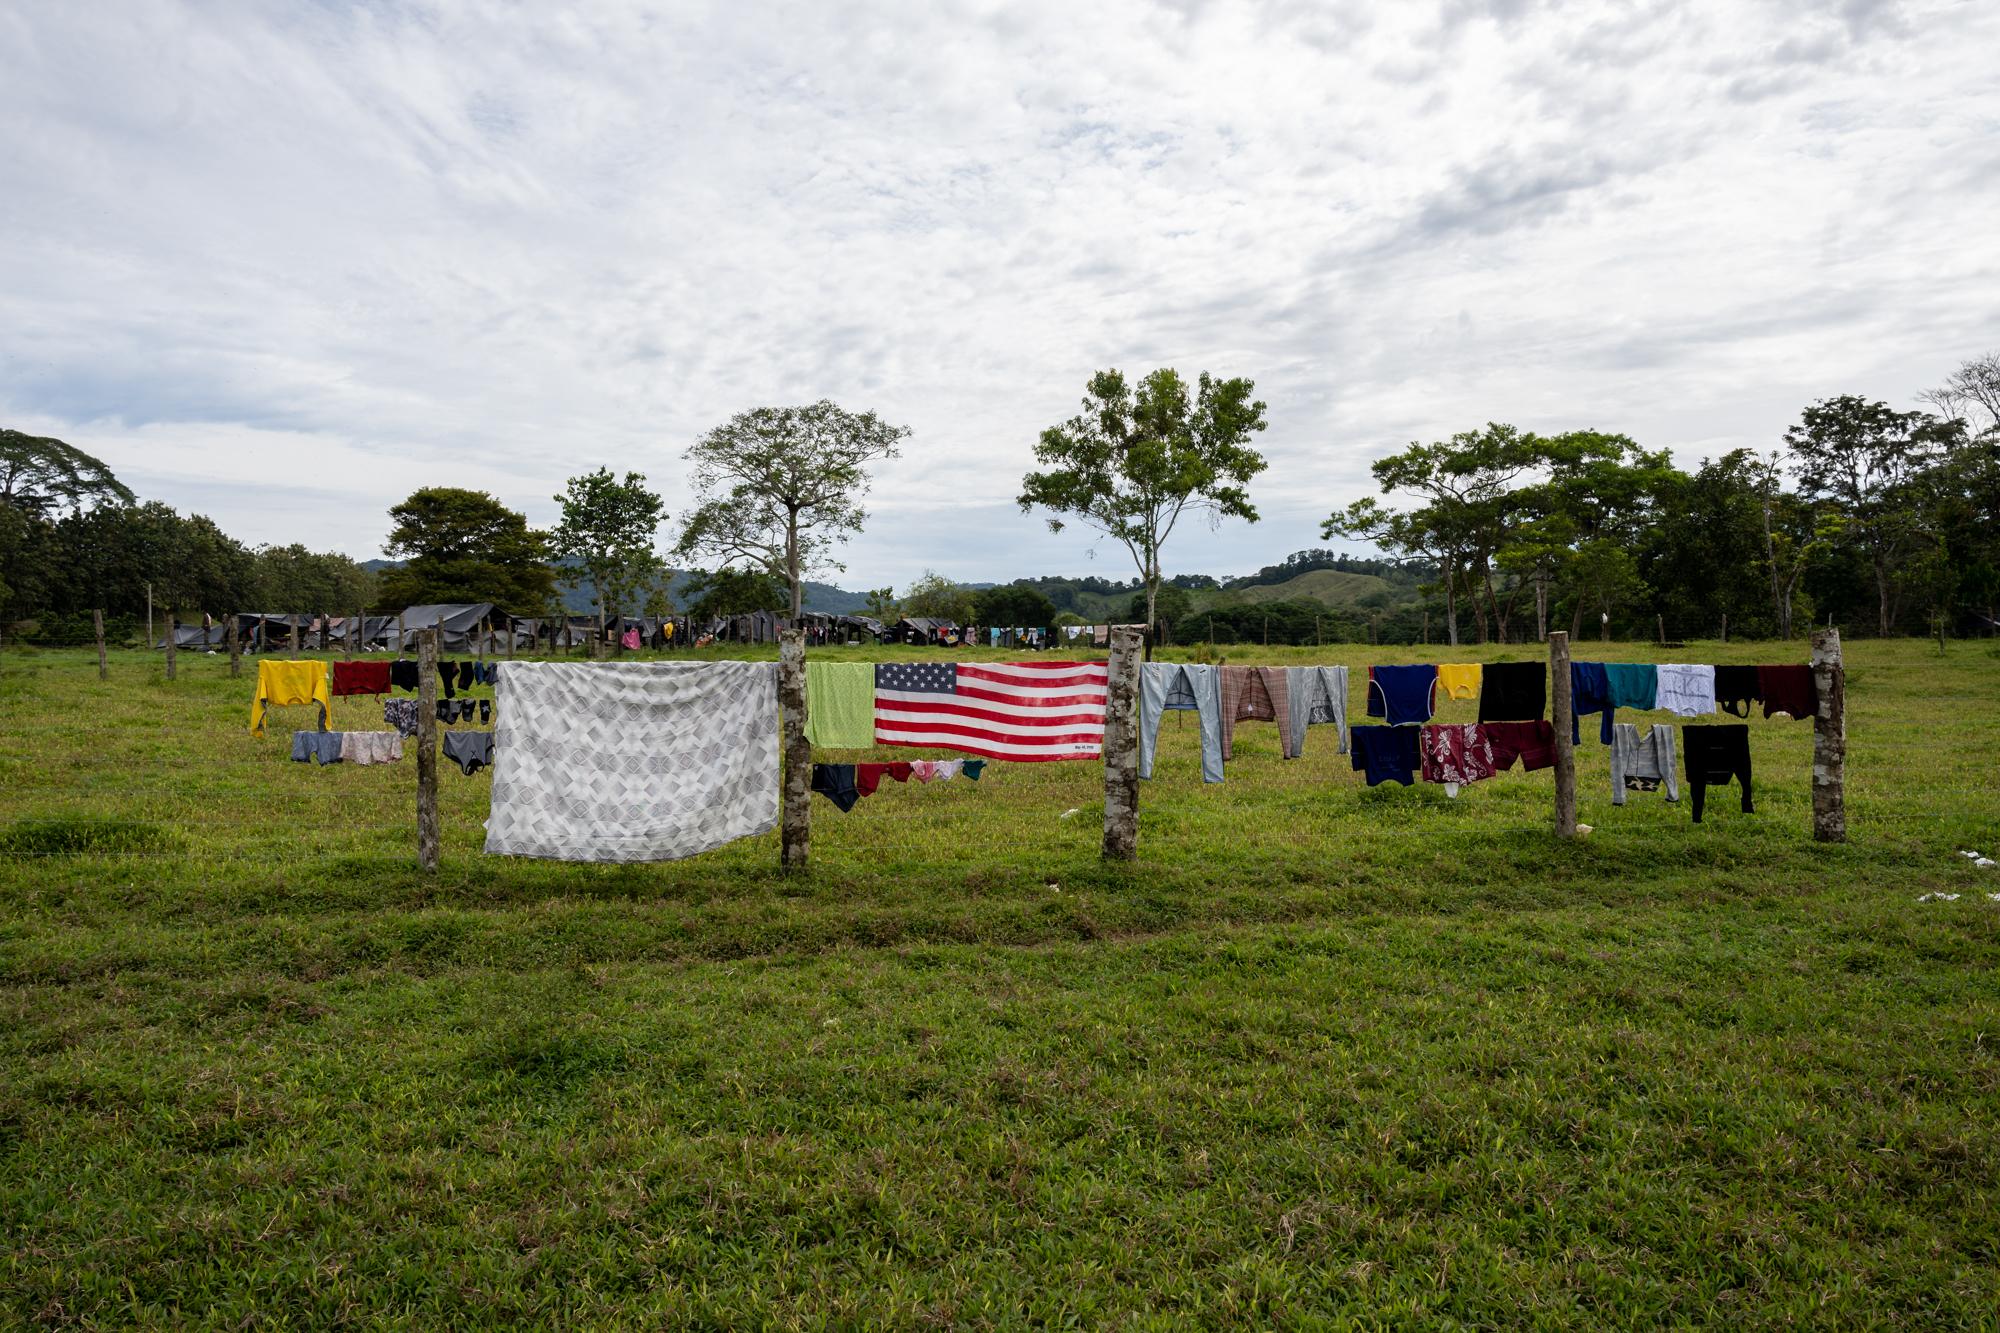 Inside The Derian Gap - A towel styled like the U.S. flag hangs on a wire fence...